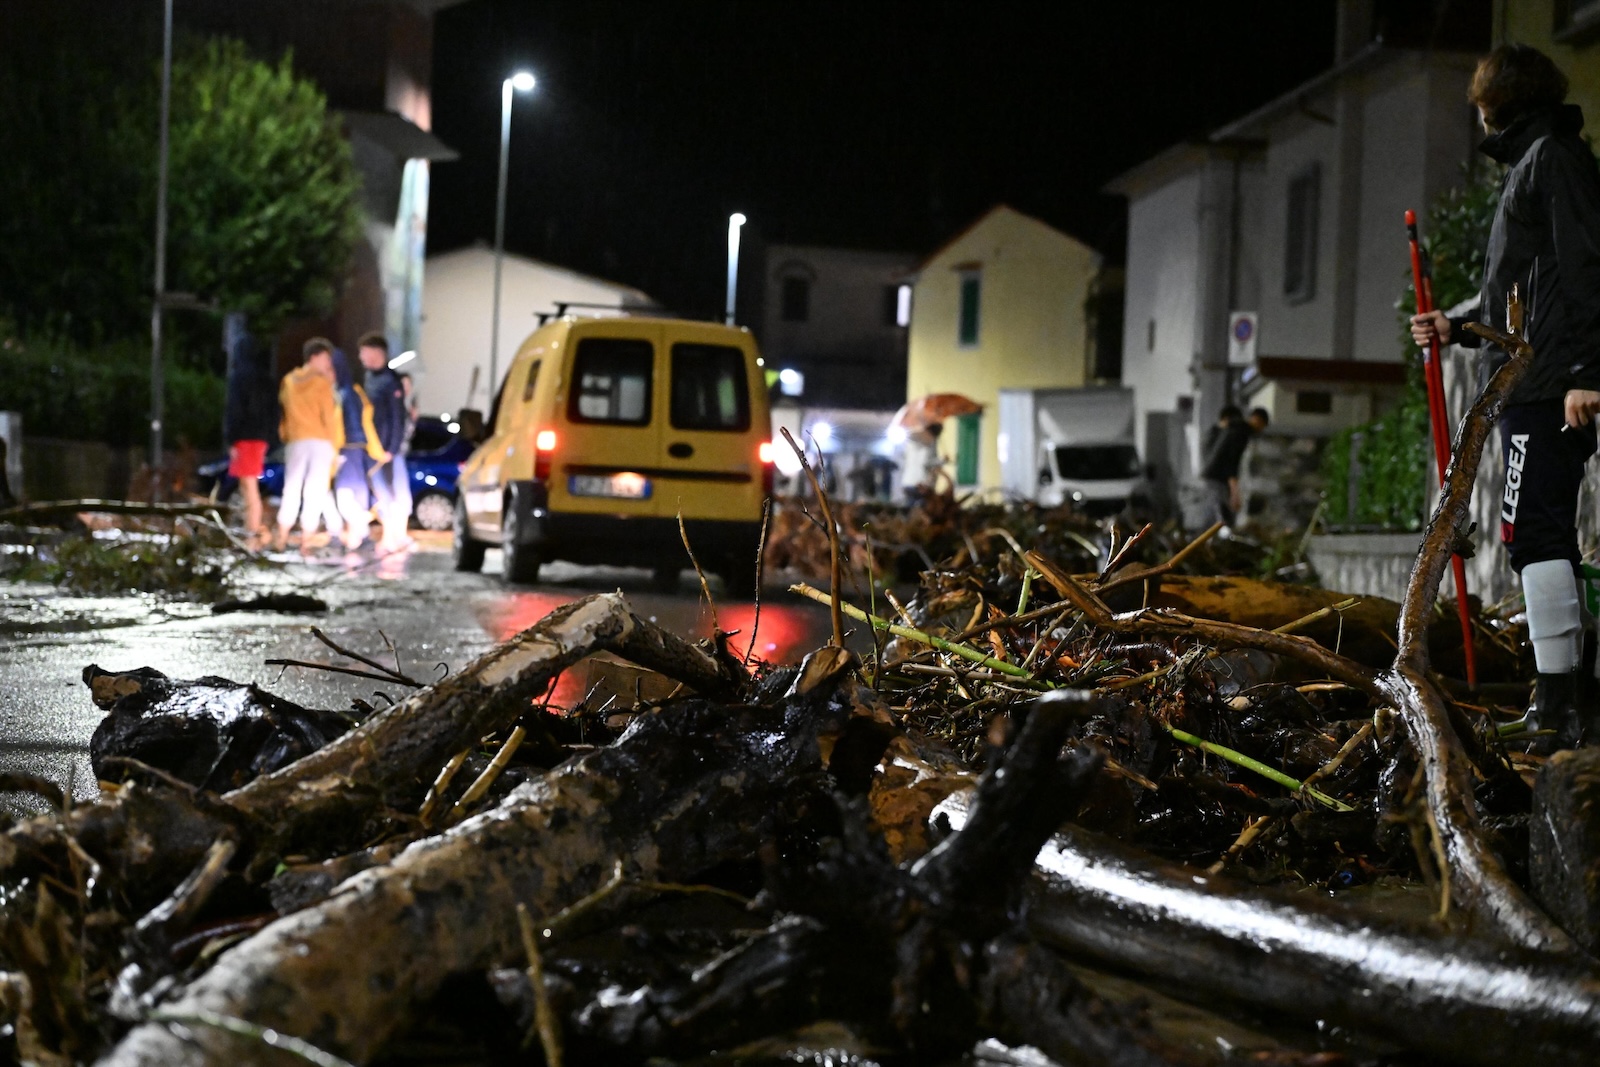 epa10955493 Branches and debris from flood water are seen in Santa Lucia, Prato, Tuscany, Italy, 02 November 2023. The Bisenzio river flooded in Prato, cars were carried away by the current, a hospital and a railway station were flooded. Flooding and landslides due to the strong thunderstorms were reported in the Tuscany region, with 3,600 homes without electricity being reported.  EPA/CLAUDIO GIOVANNINI